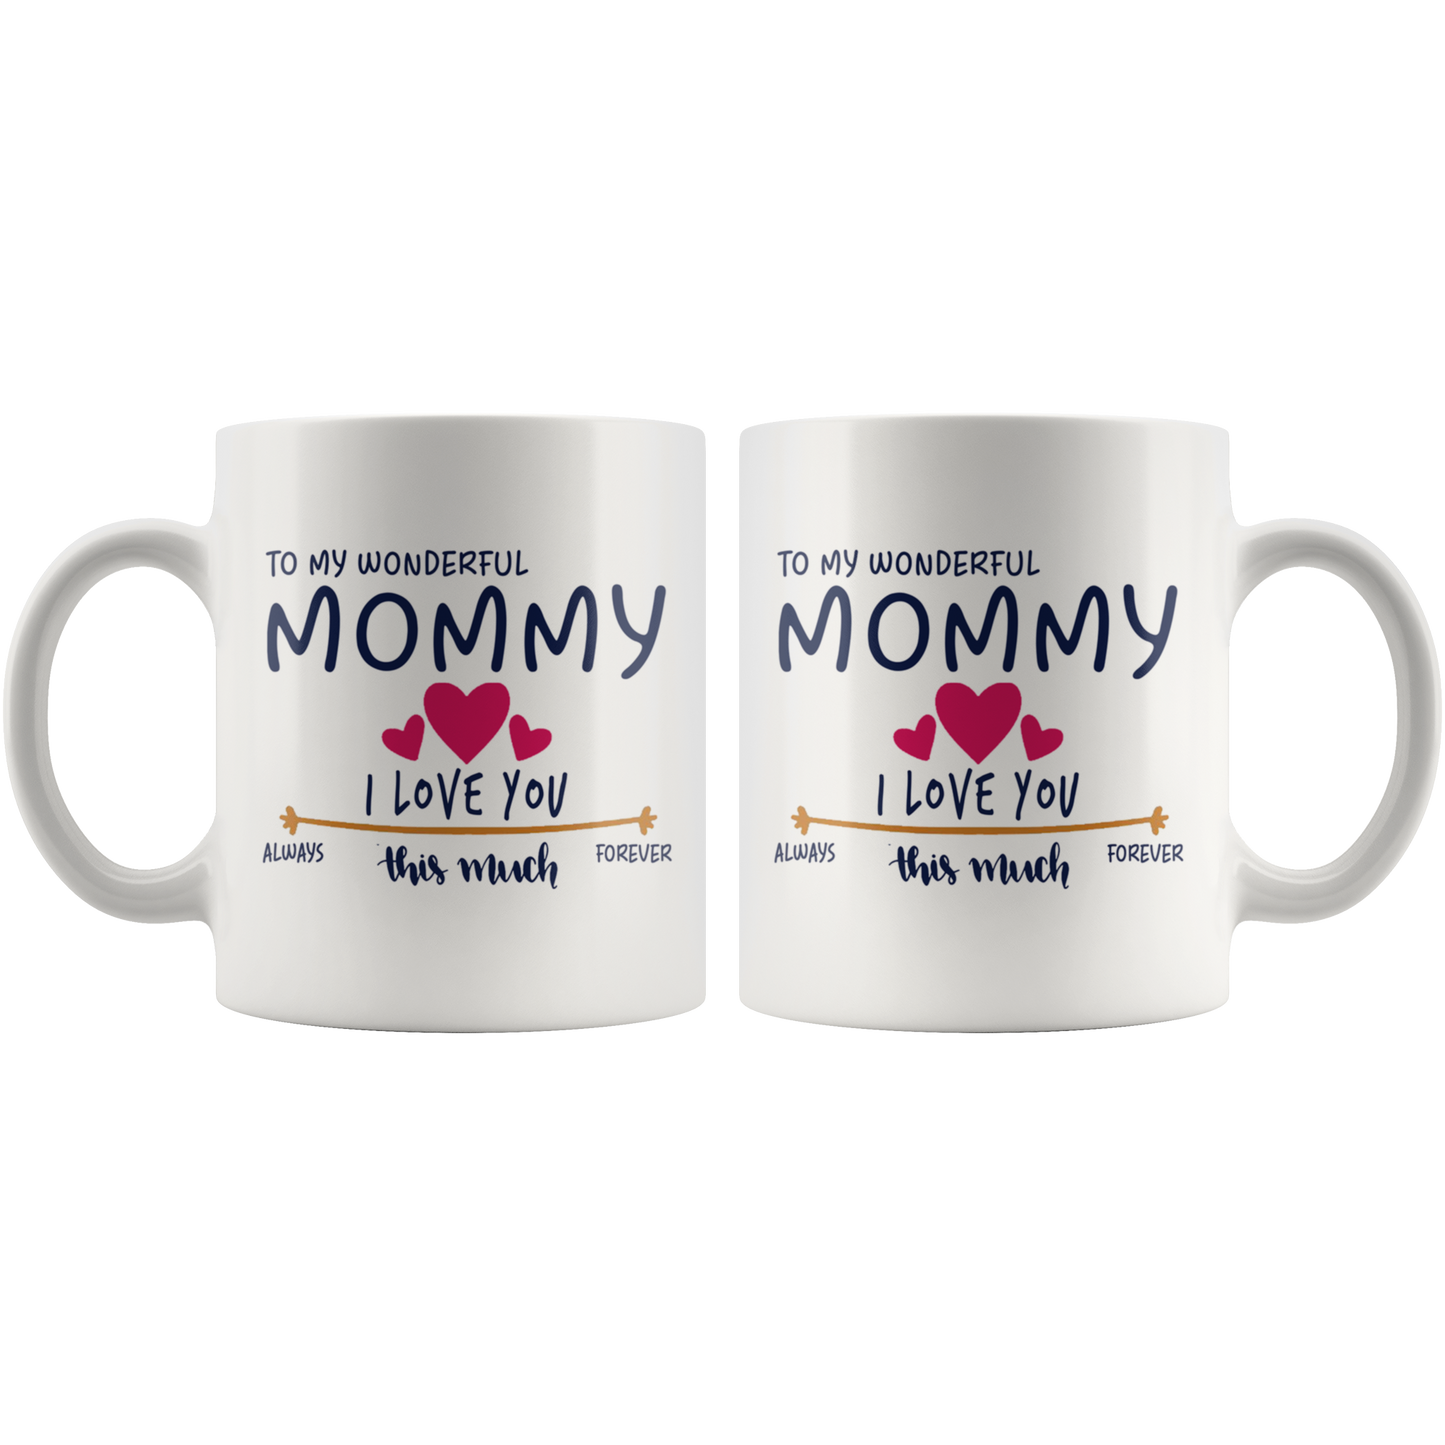 M-20470216-sp-25553 - [ Mommy | 1 ] (mug_11oz_white) Mom Day Gifts From Daughter or Son - To My Wonderful Mommy I